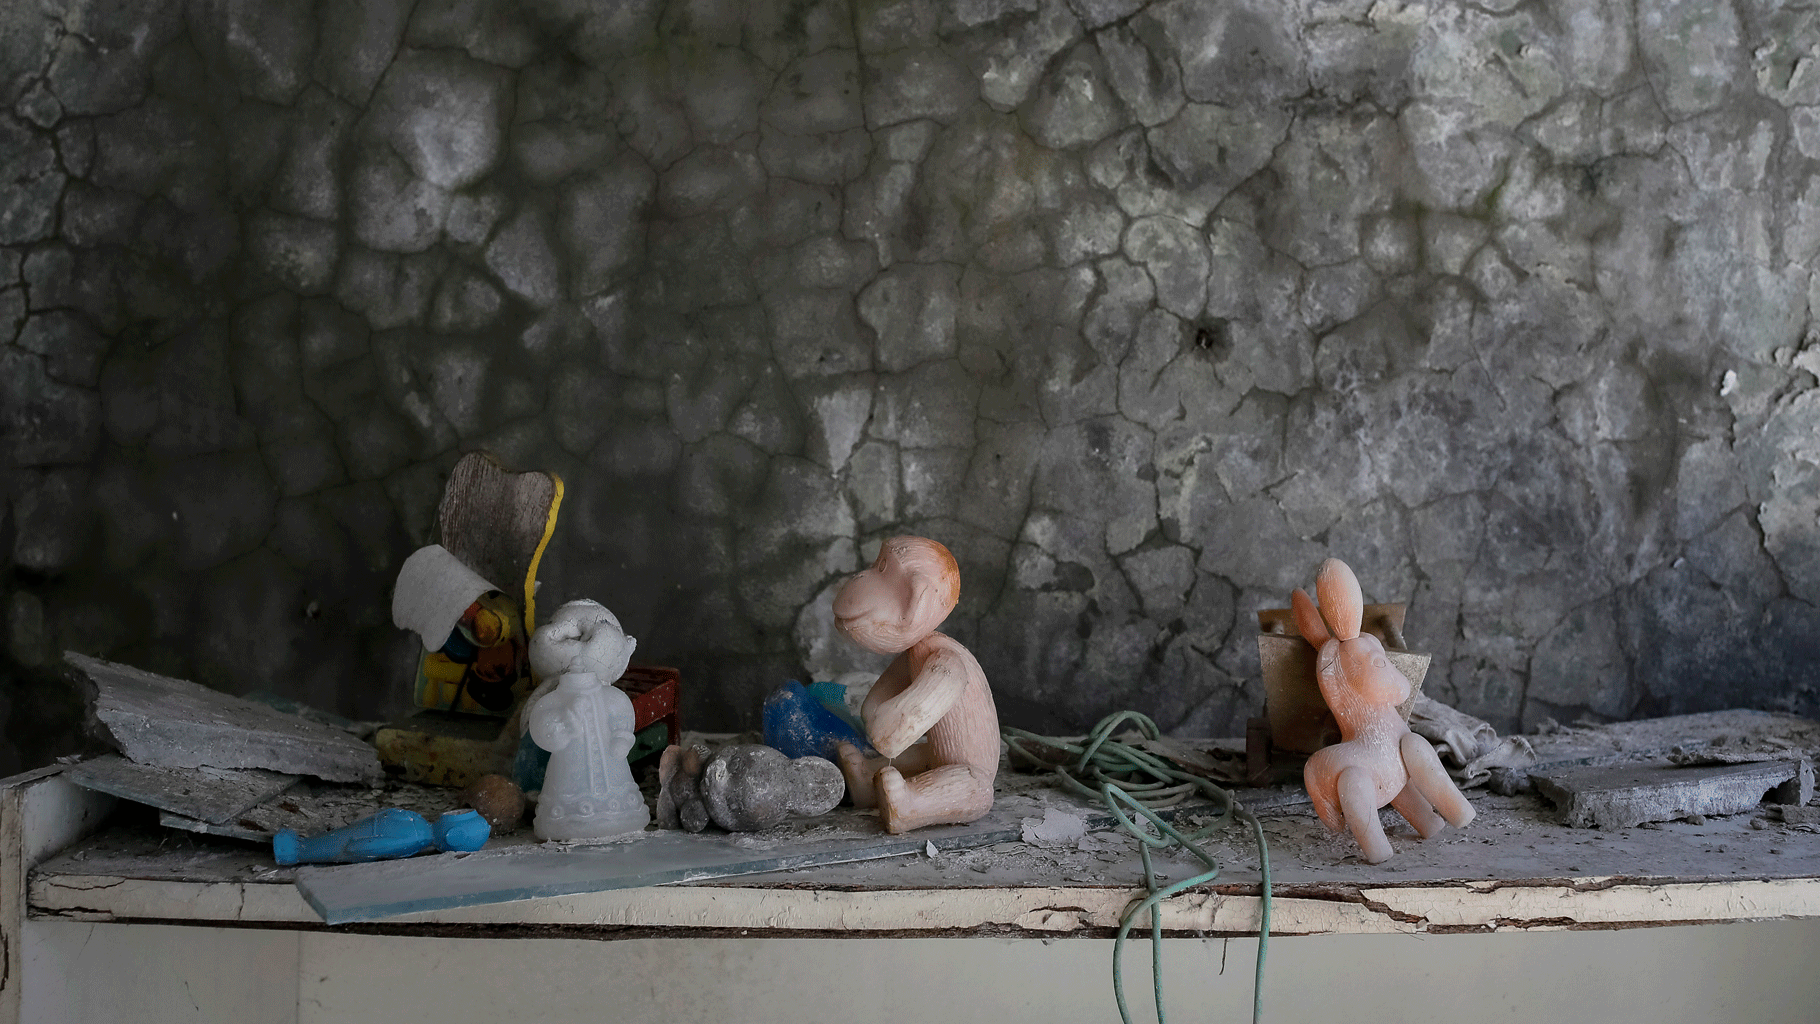 Hastily abandoned toys at a kindergarten in Pripyat, Ukraine after the explosion at Reactor No 4 at the Chernobyl Nuclear Plant on 26 April 1986. (Photo: Reuters) 